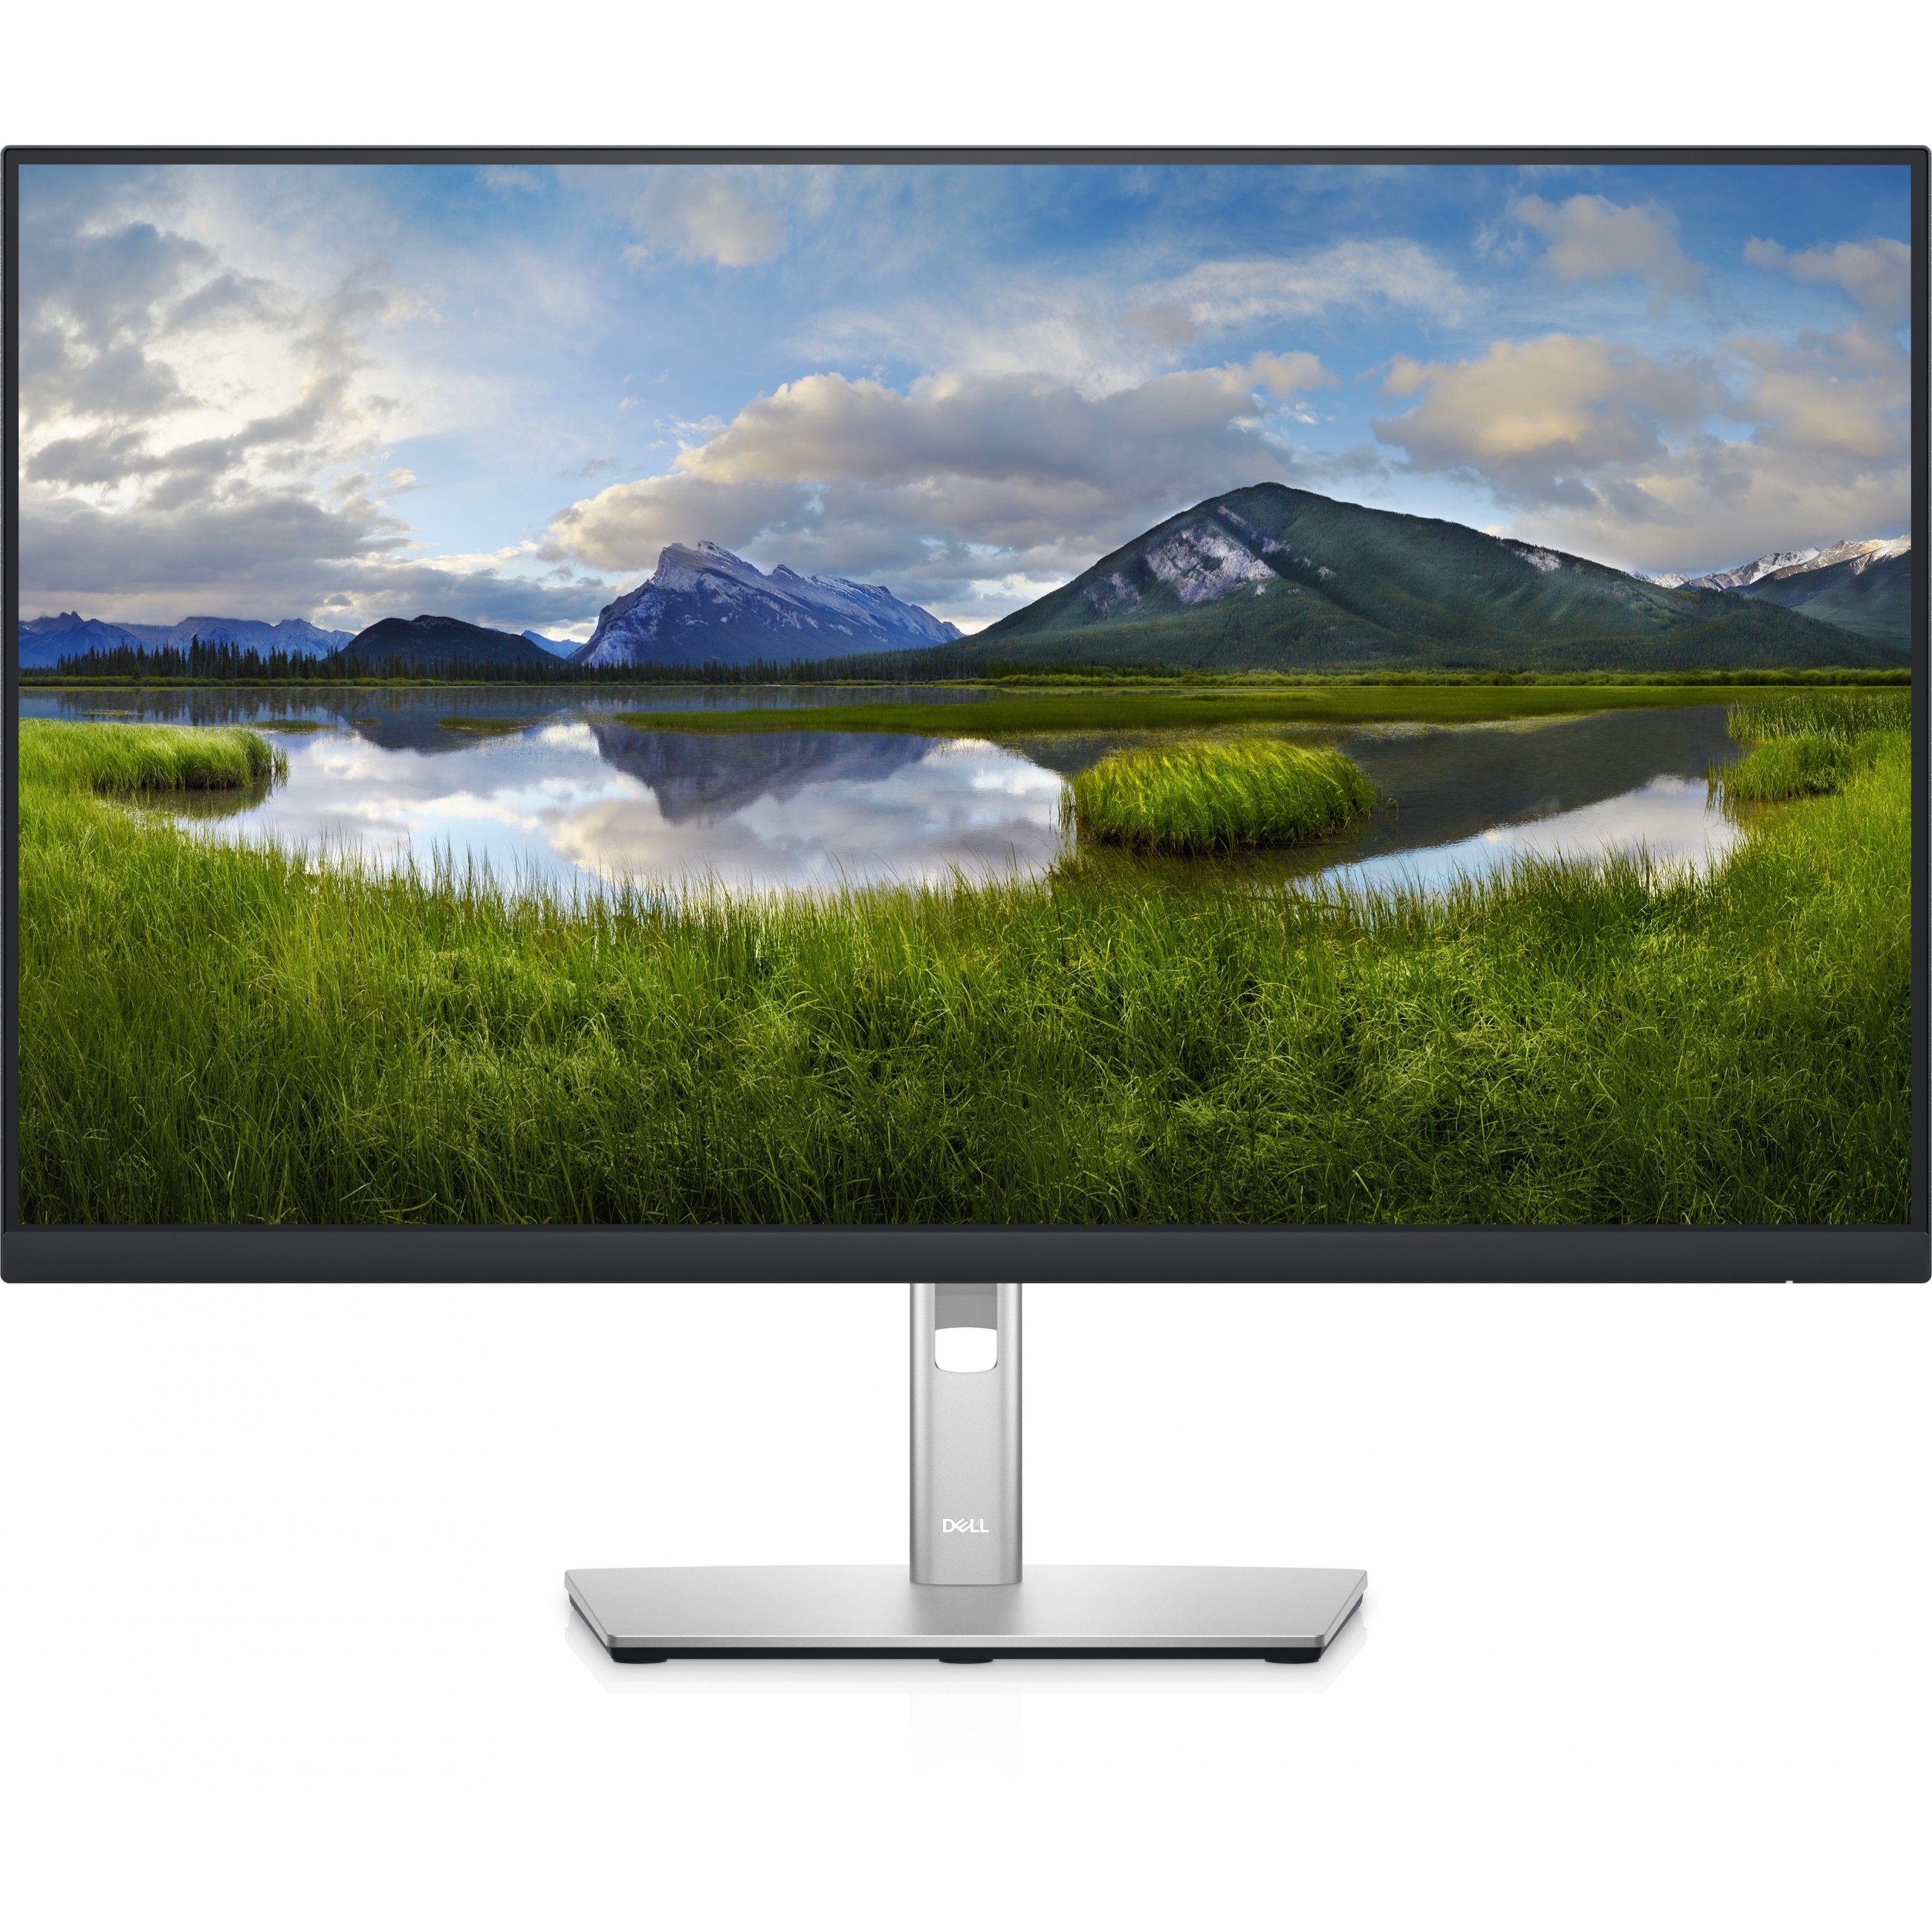 DELL P Series P2722HE LED display